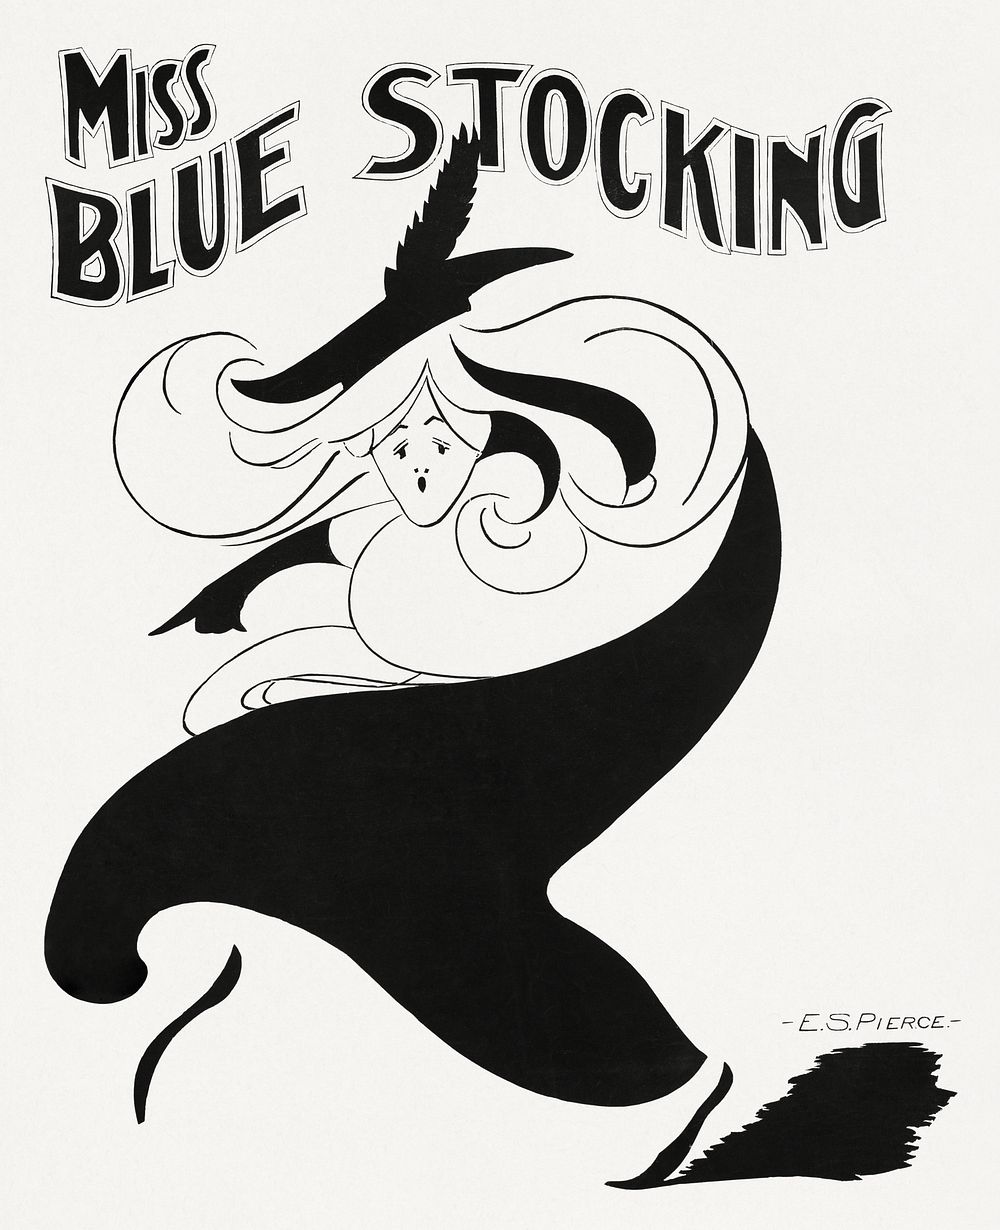 Miss Blue Stocking (1890) art noveau poster. Original public domain image from the Library of Congress. Digitally enhanced…